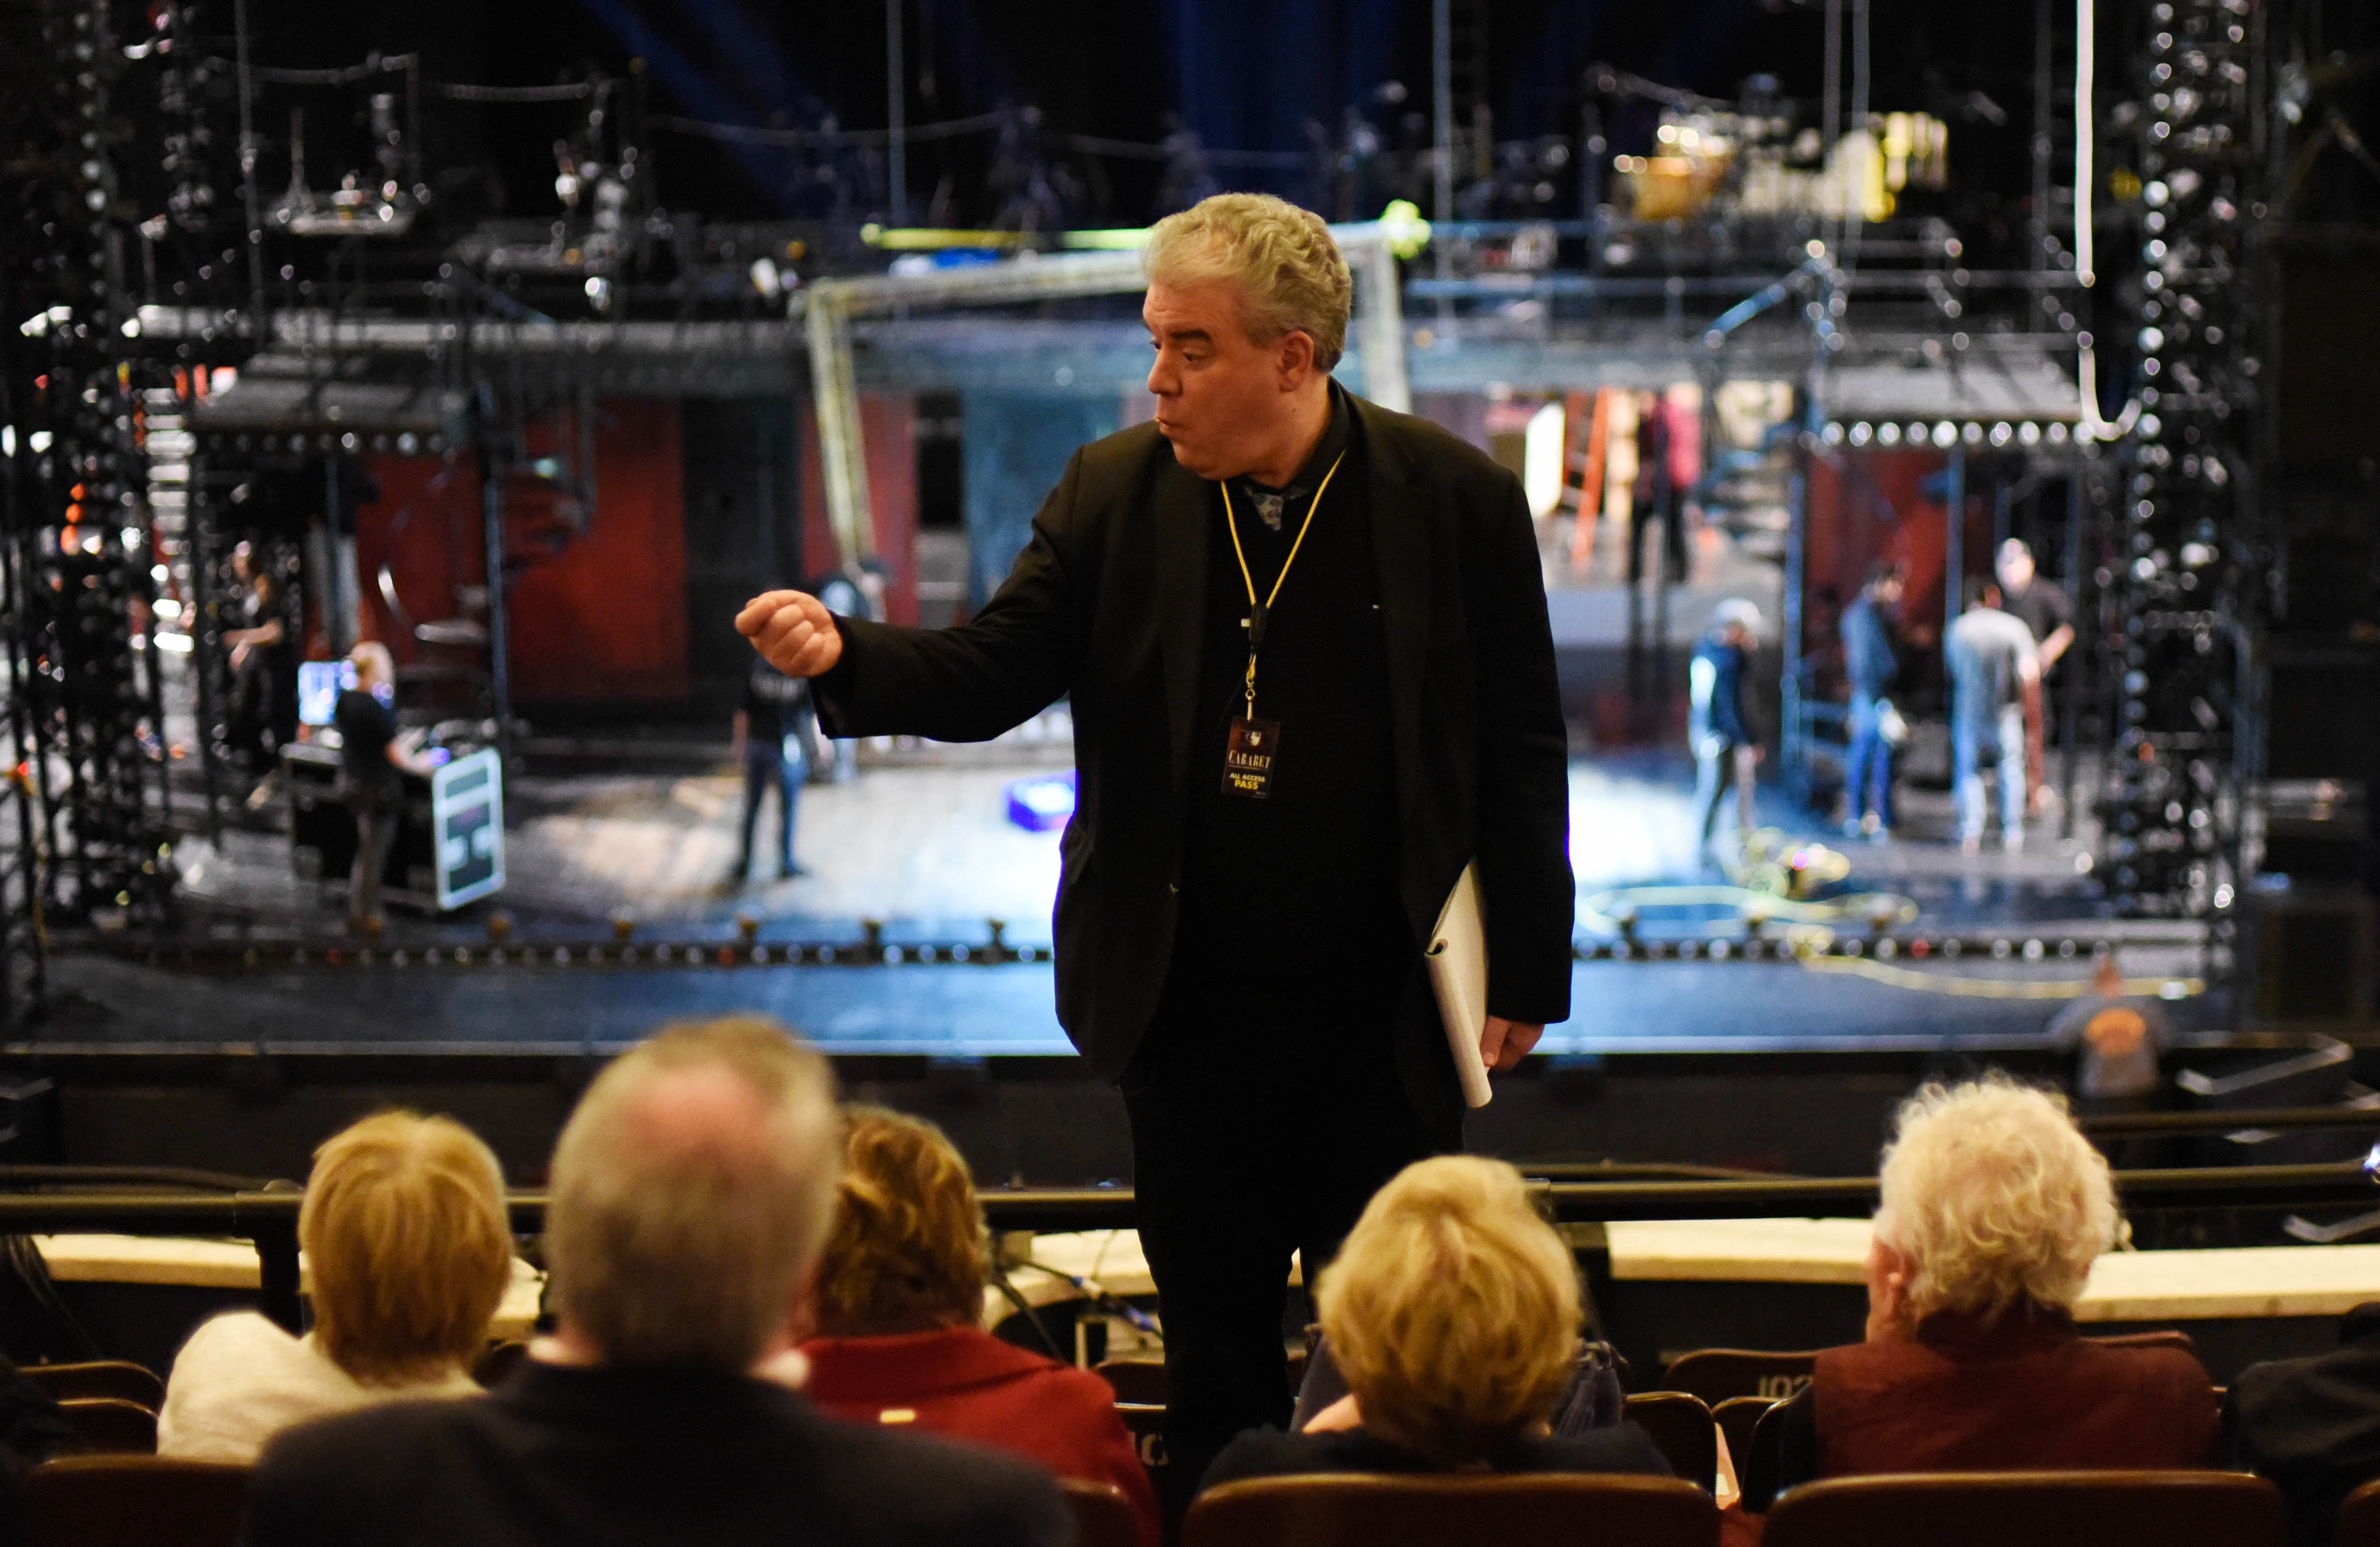 John Atherlay, production stage manager for "Cabaret", talks about what goes into setting up for the show during the load in lunch at Proctors Tuesday, May 9, 2017.